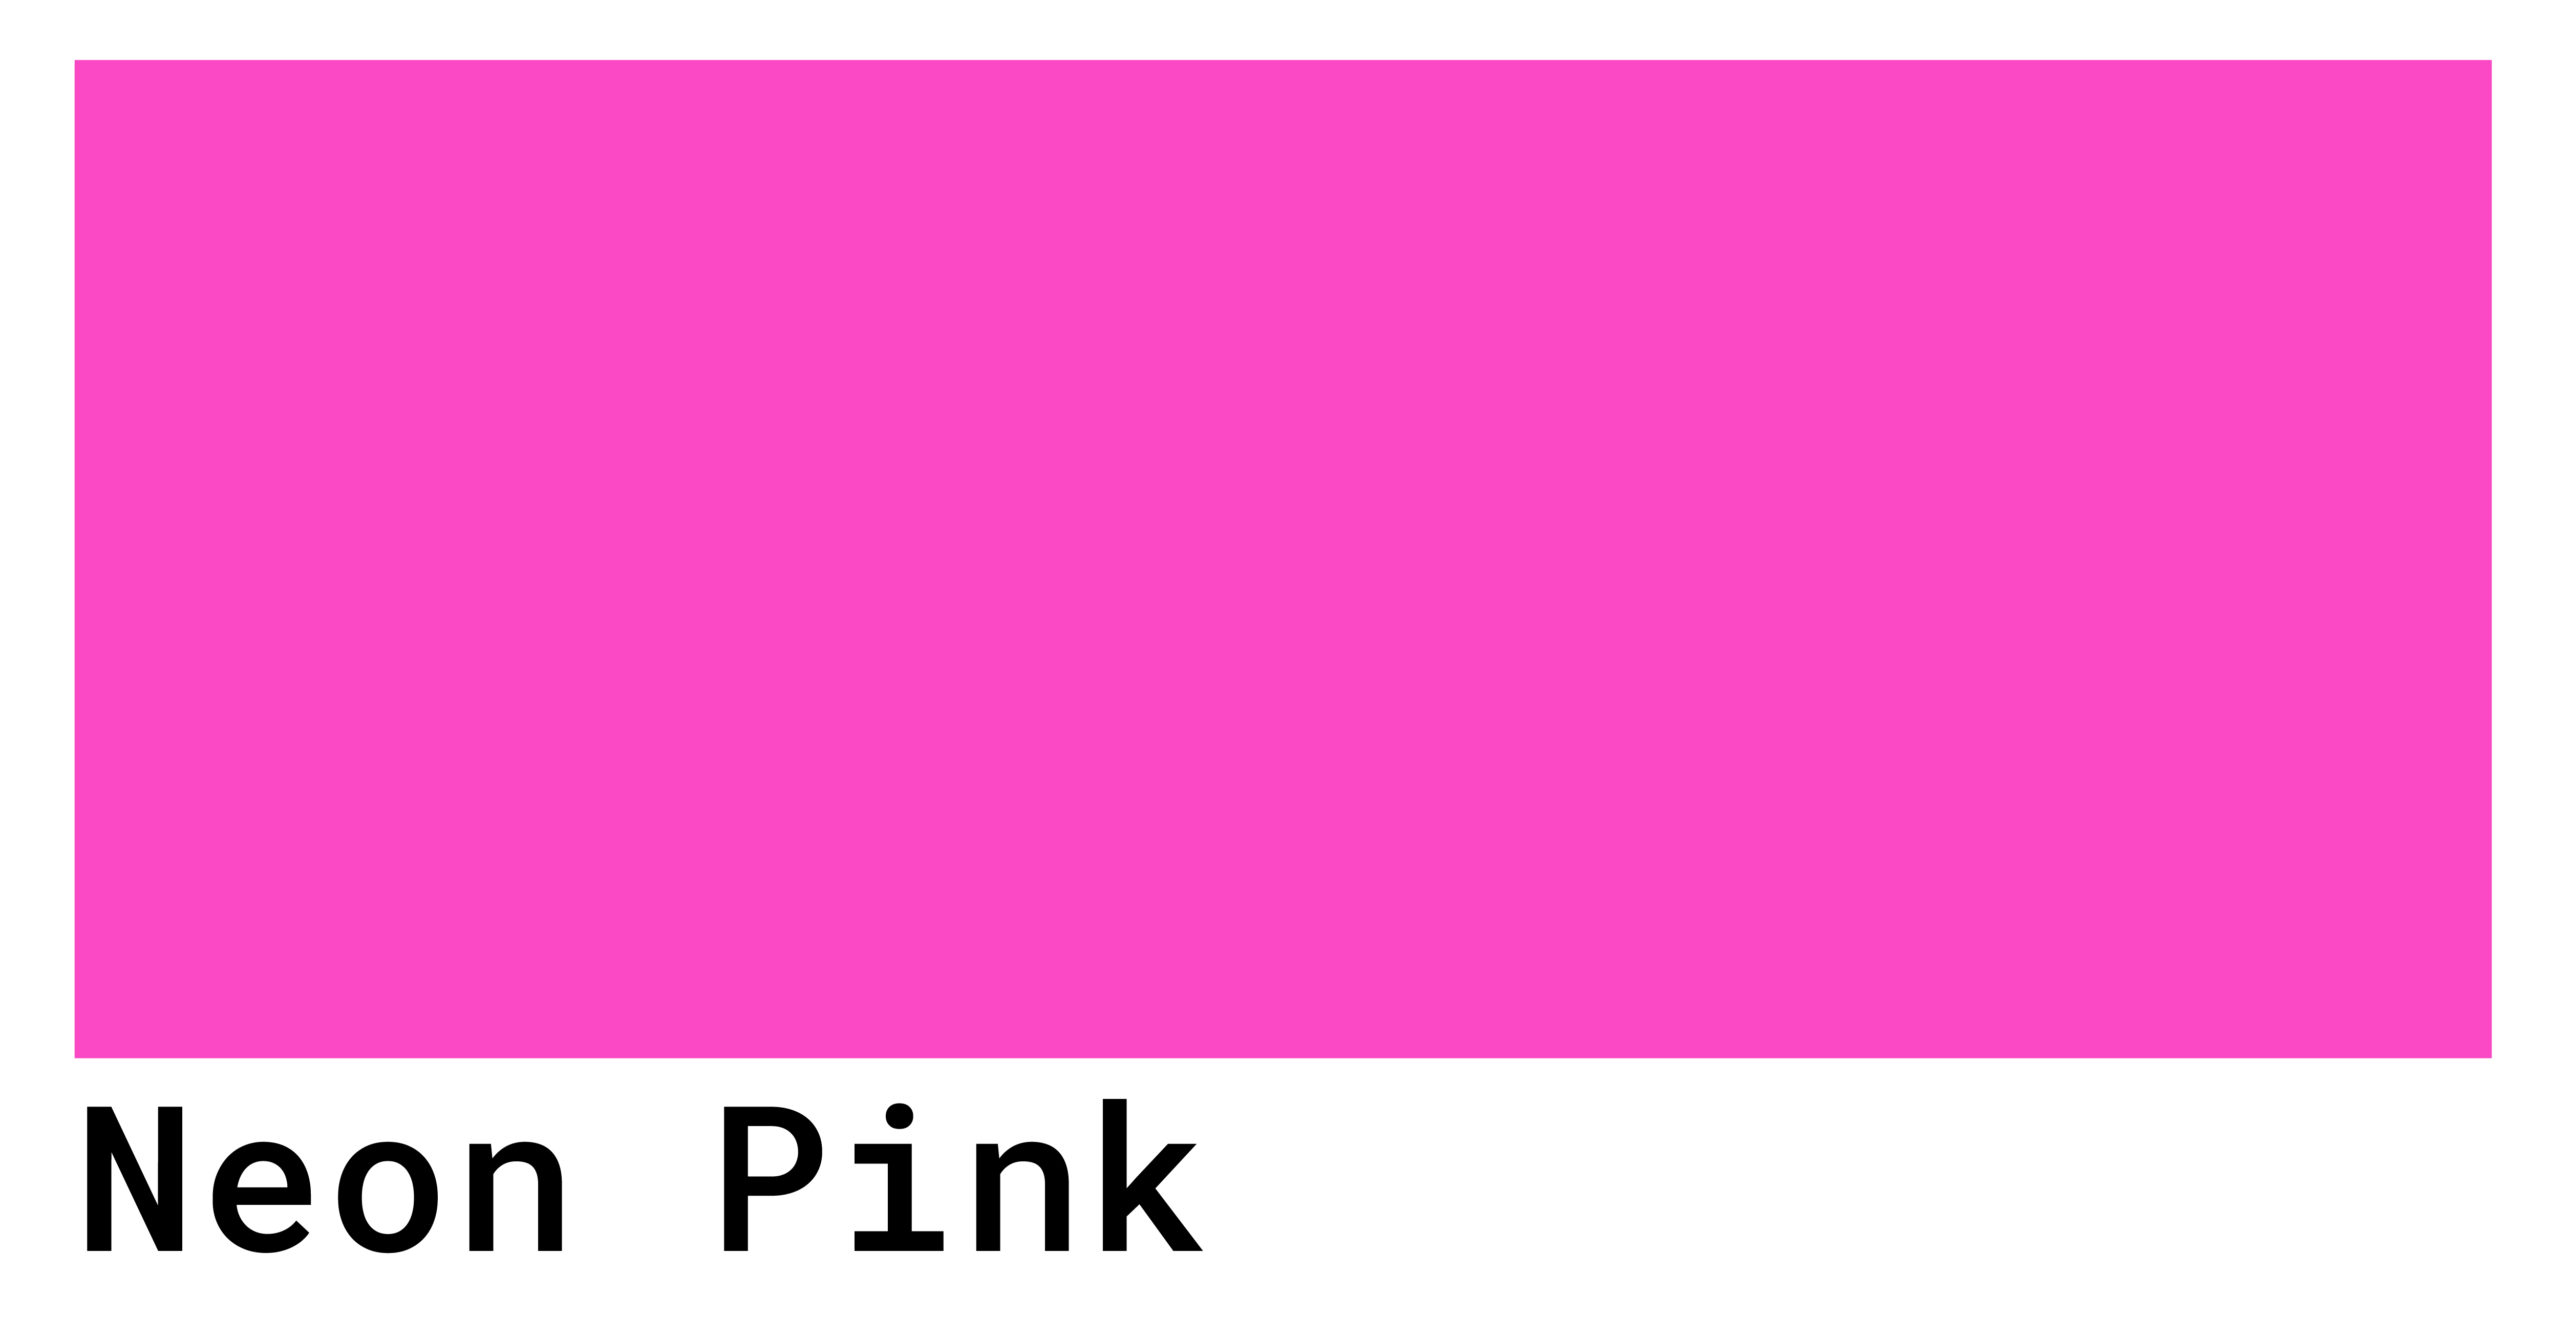 Neon Pink Color Swatch Scaled 